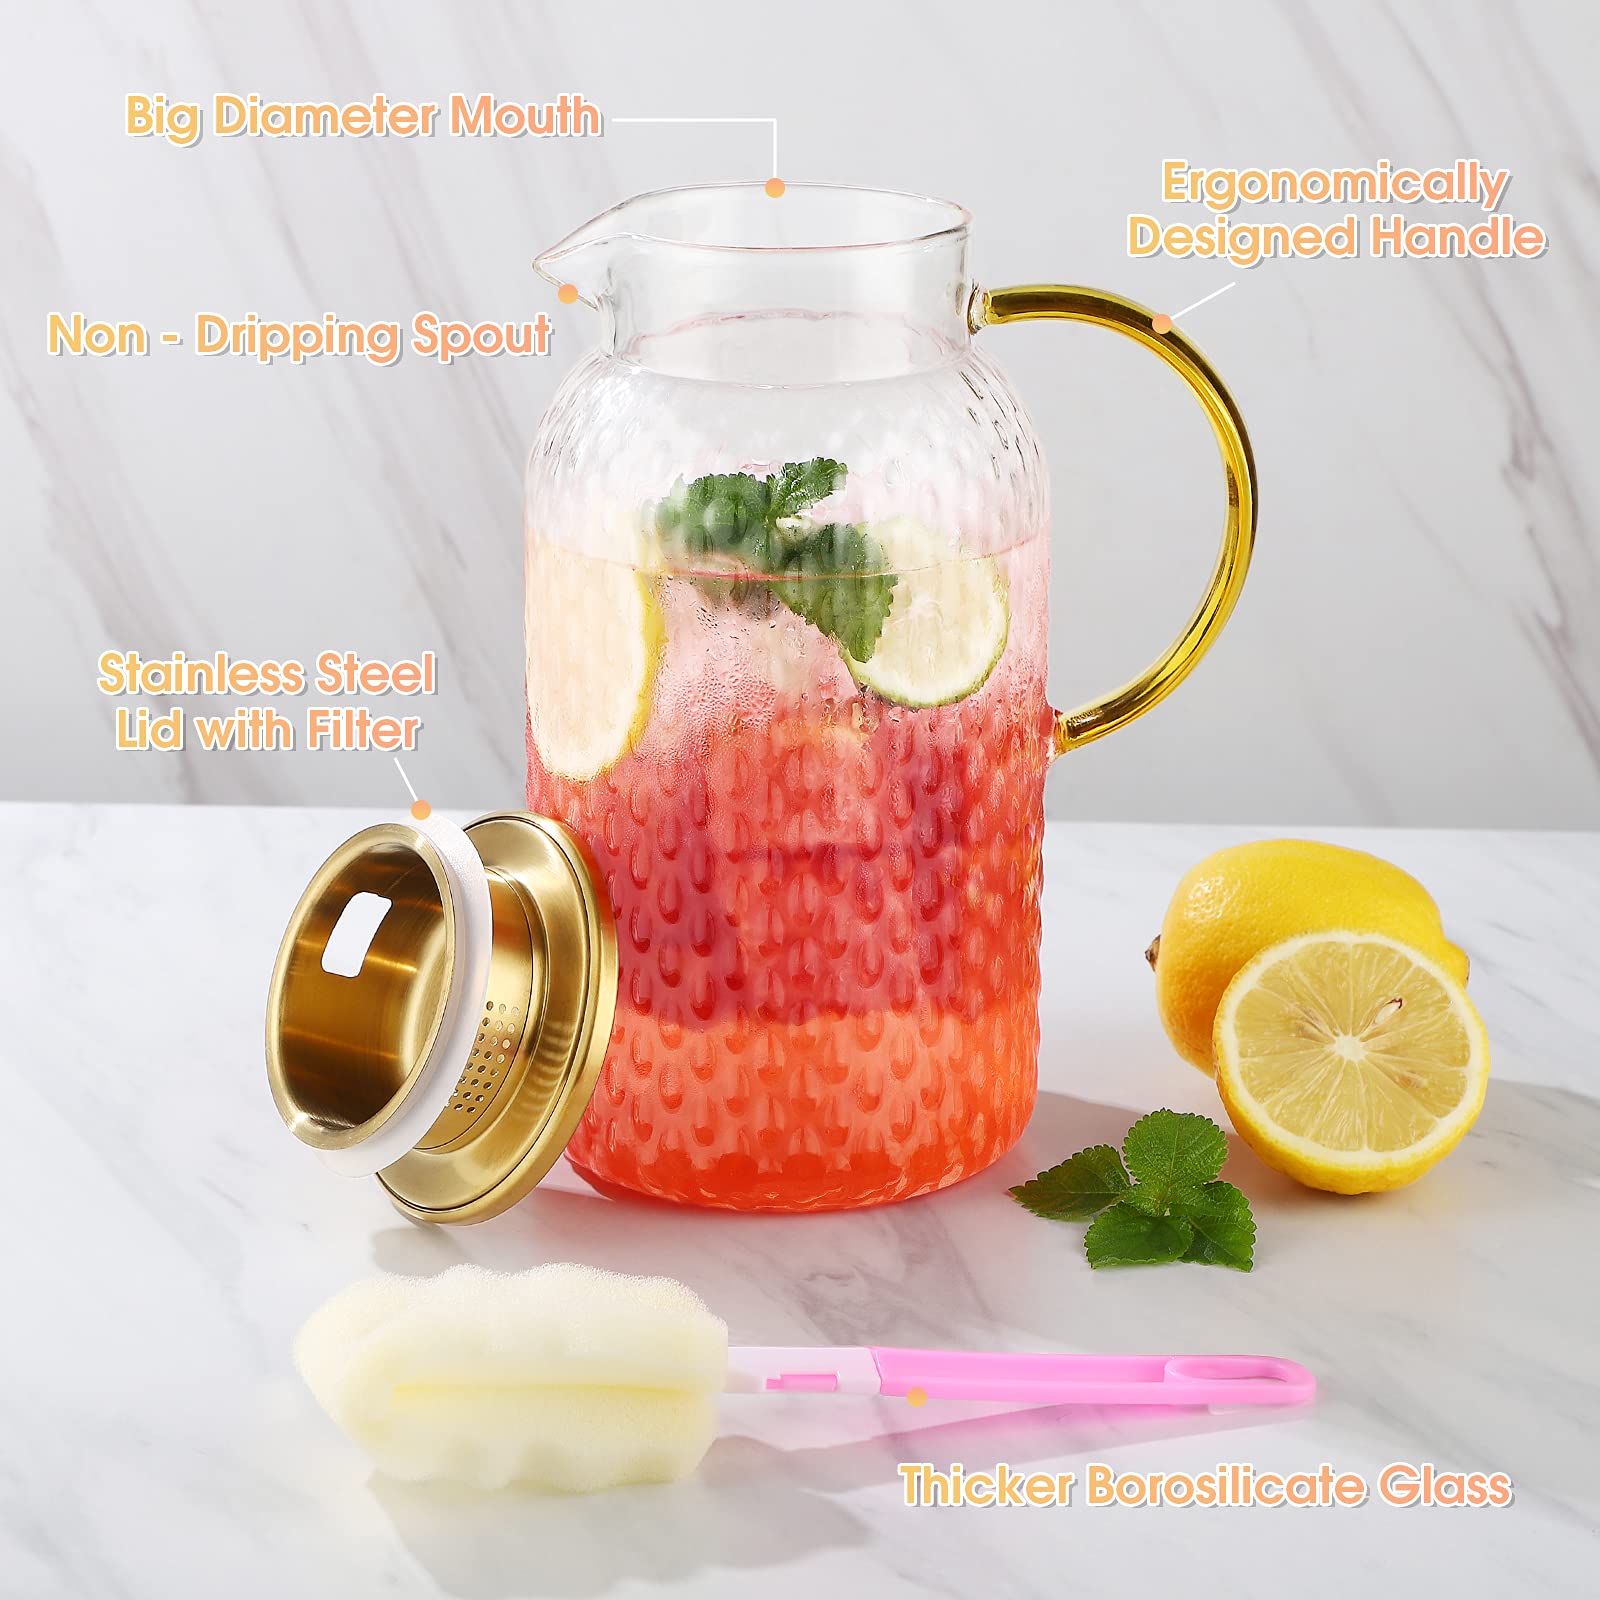 Glass Pitcher - 66 OZ fridge door pitcher Drip-Free Glass Water Pitcher with Lid, 18/8 Stainless Steel Iced Tea Pitcher, Easy Clean Heat Resistance Glass Carafe For Hot/Cold Beverages, Iced Tea, Juice